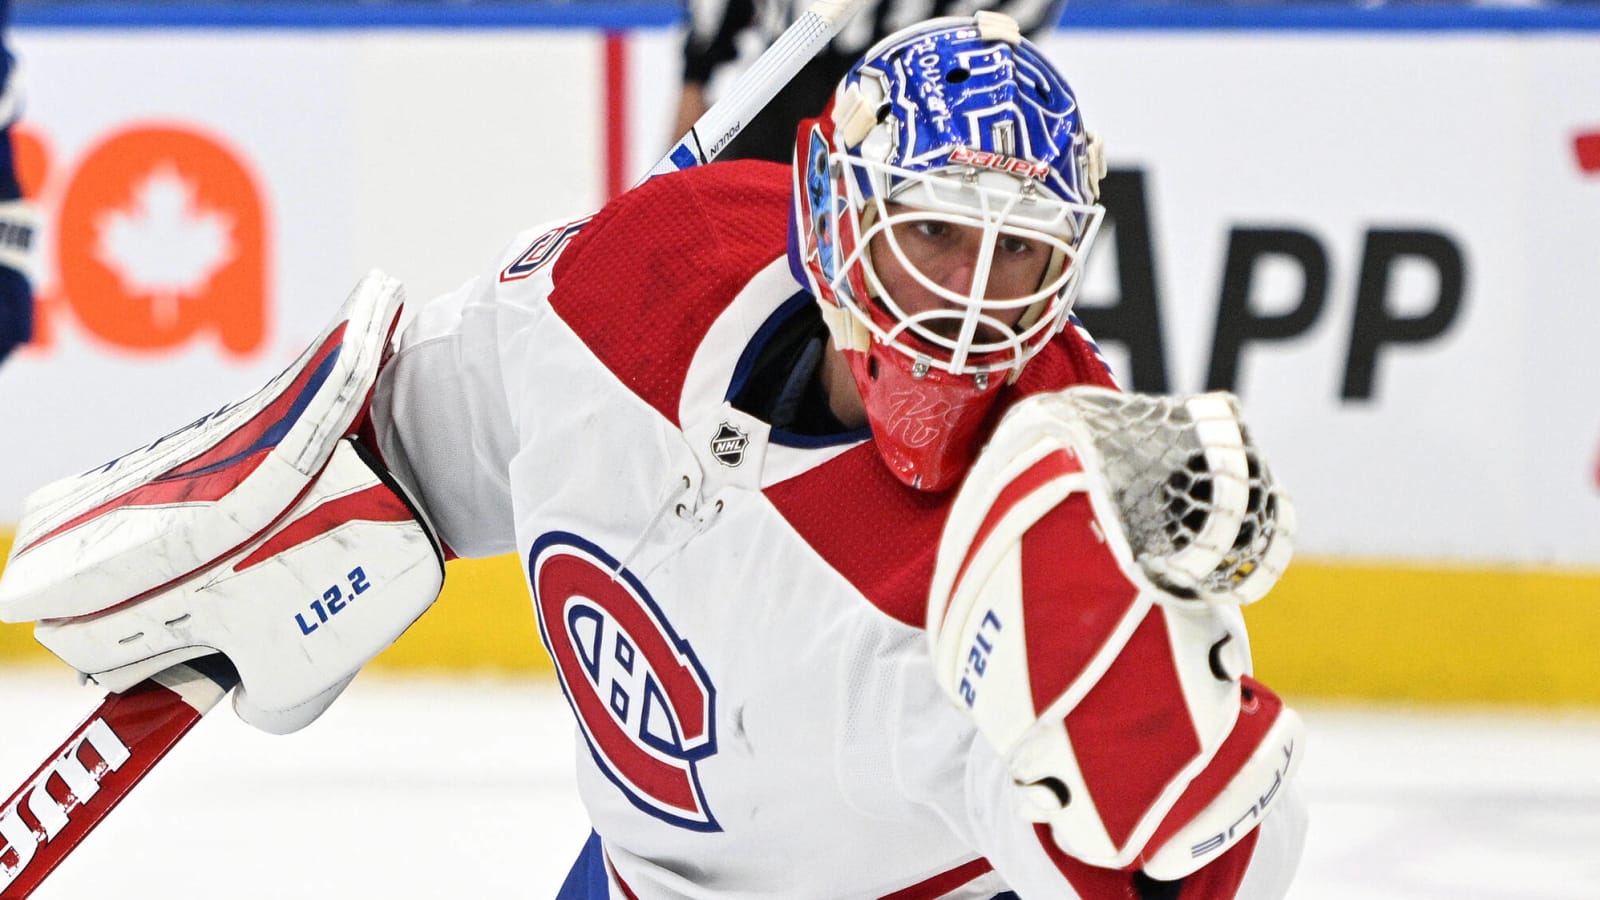 Canadiens Now Have Options For Offseason Goaltending Overhaul